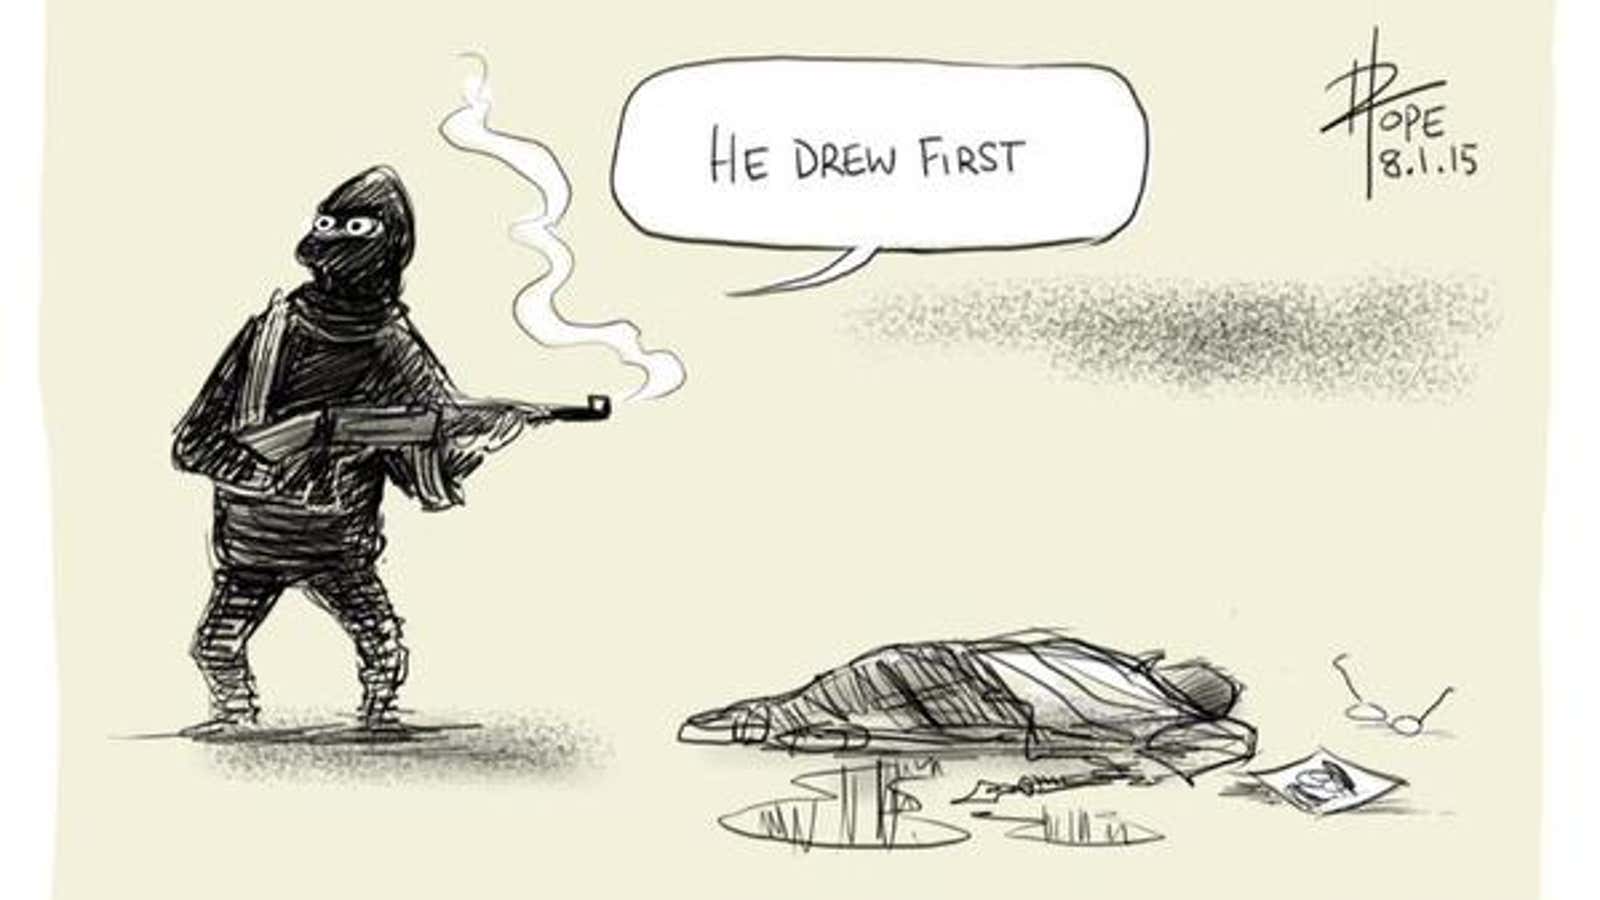 Cartoonist David Pope was one of those who posted an image in reaction to the shooting at Charlie Hebdo in Paris.